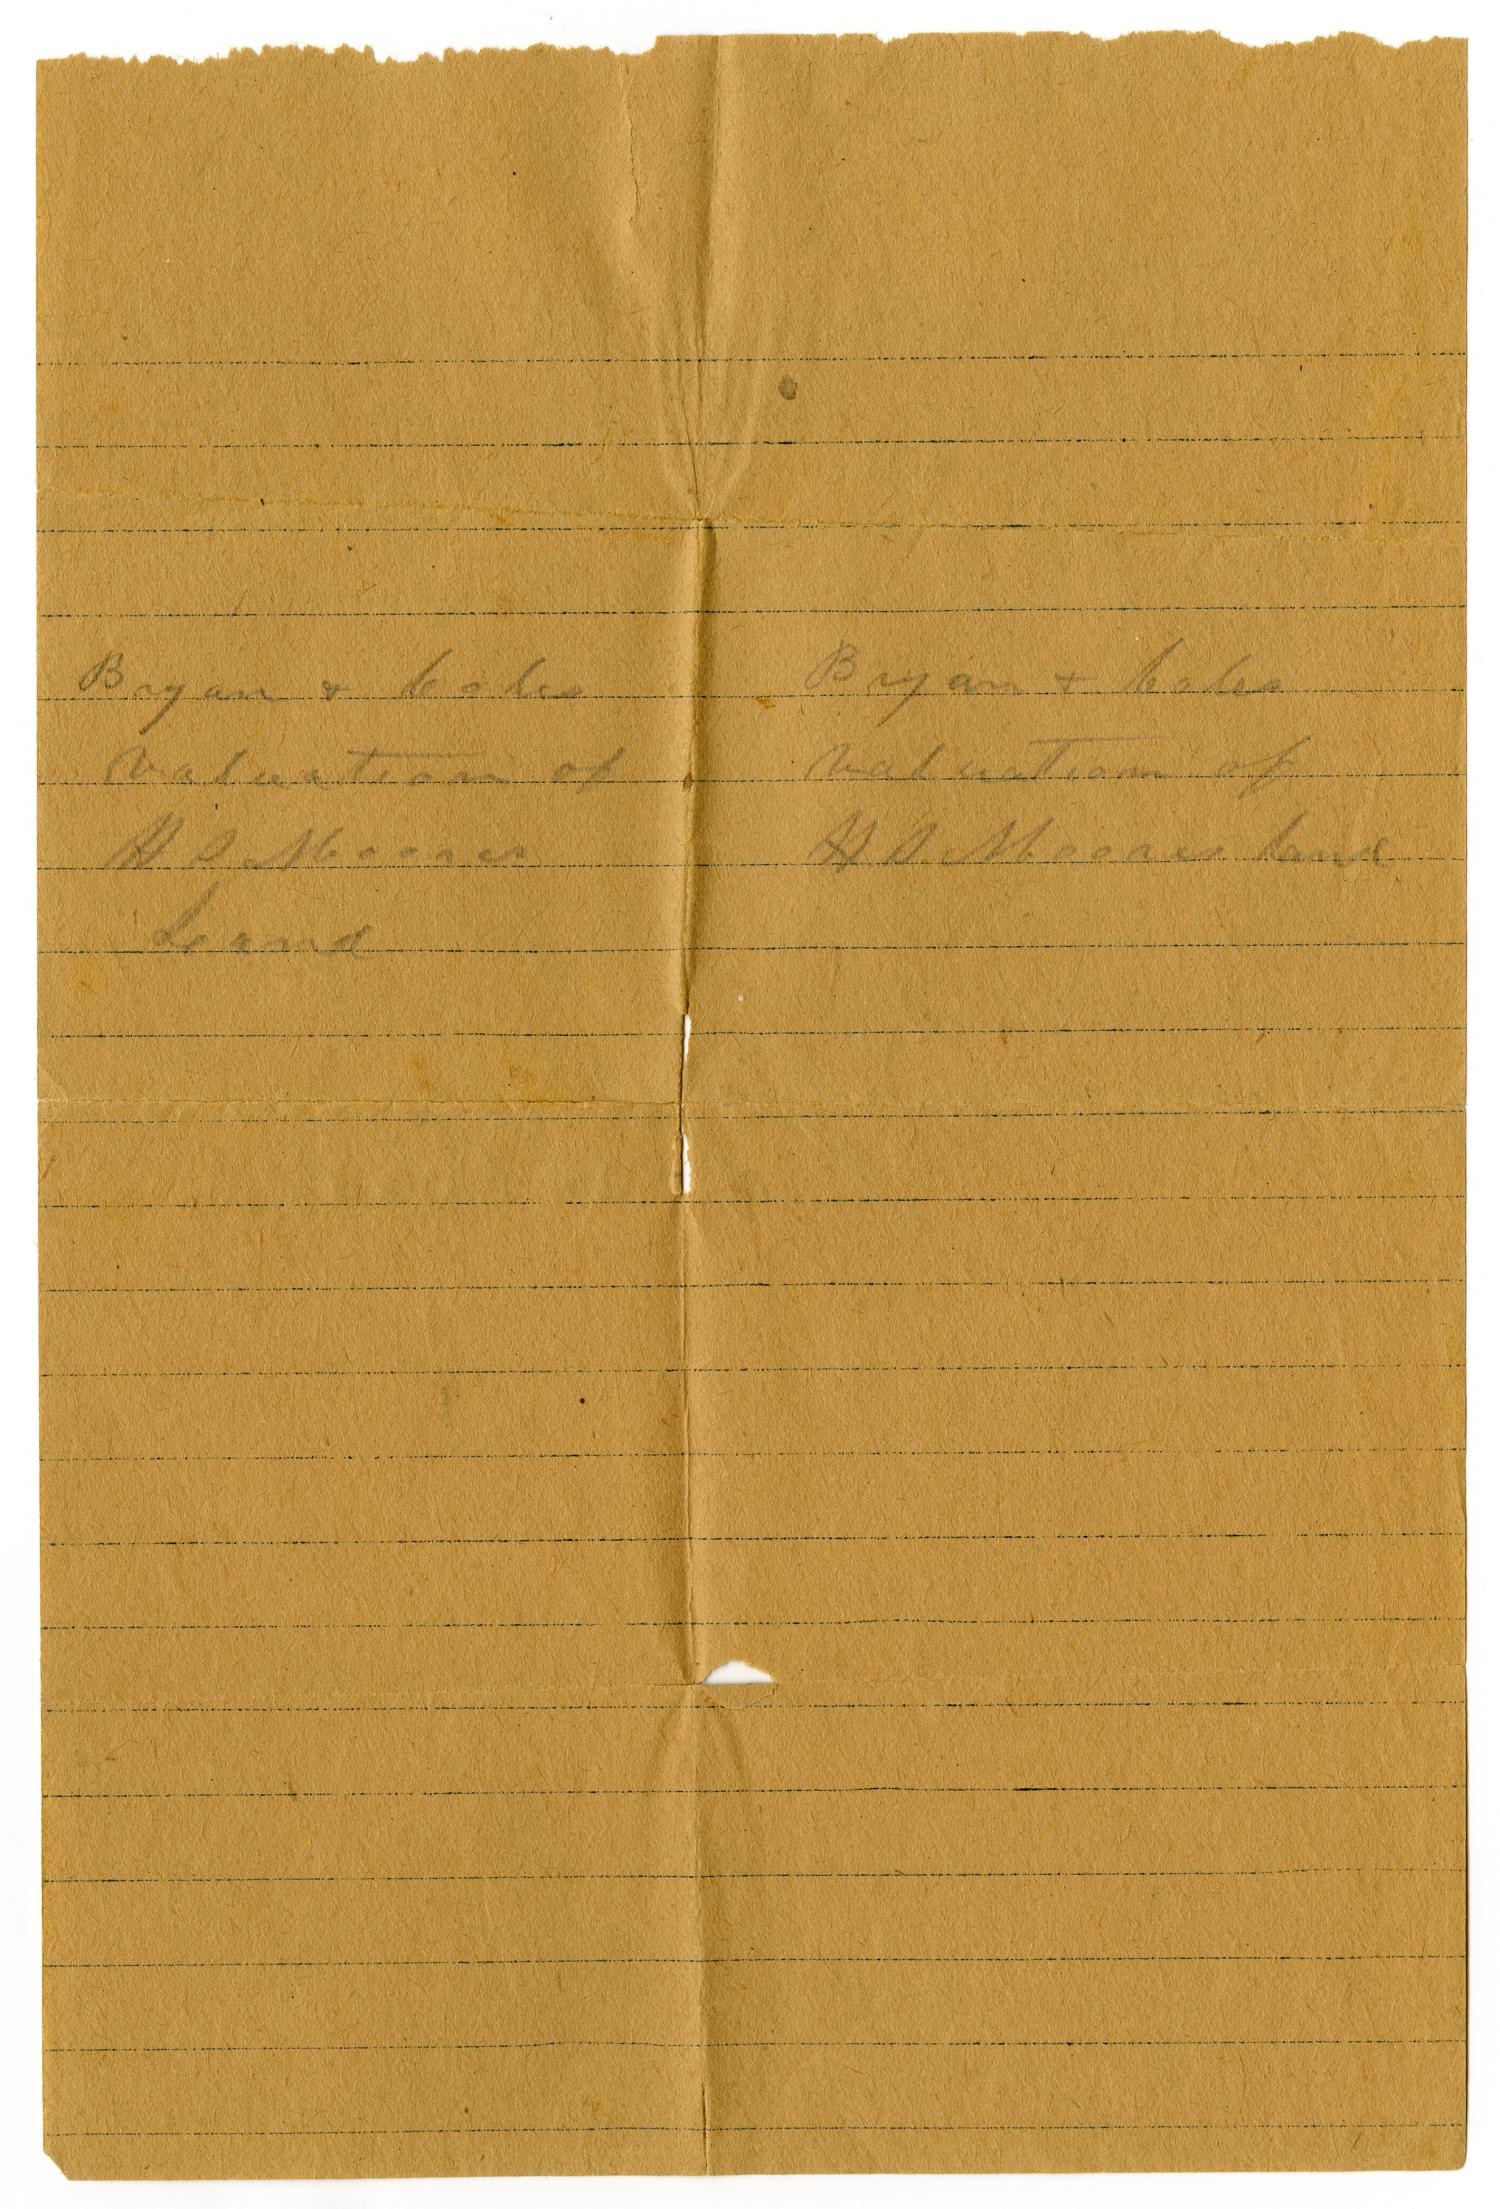 [Letter from J. M. Bryan and S. H. Coale, December 19, 1895]
                                                
                                                    [Sequence #]: 2 of 2
                                                